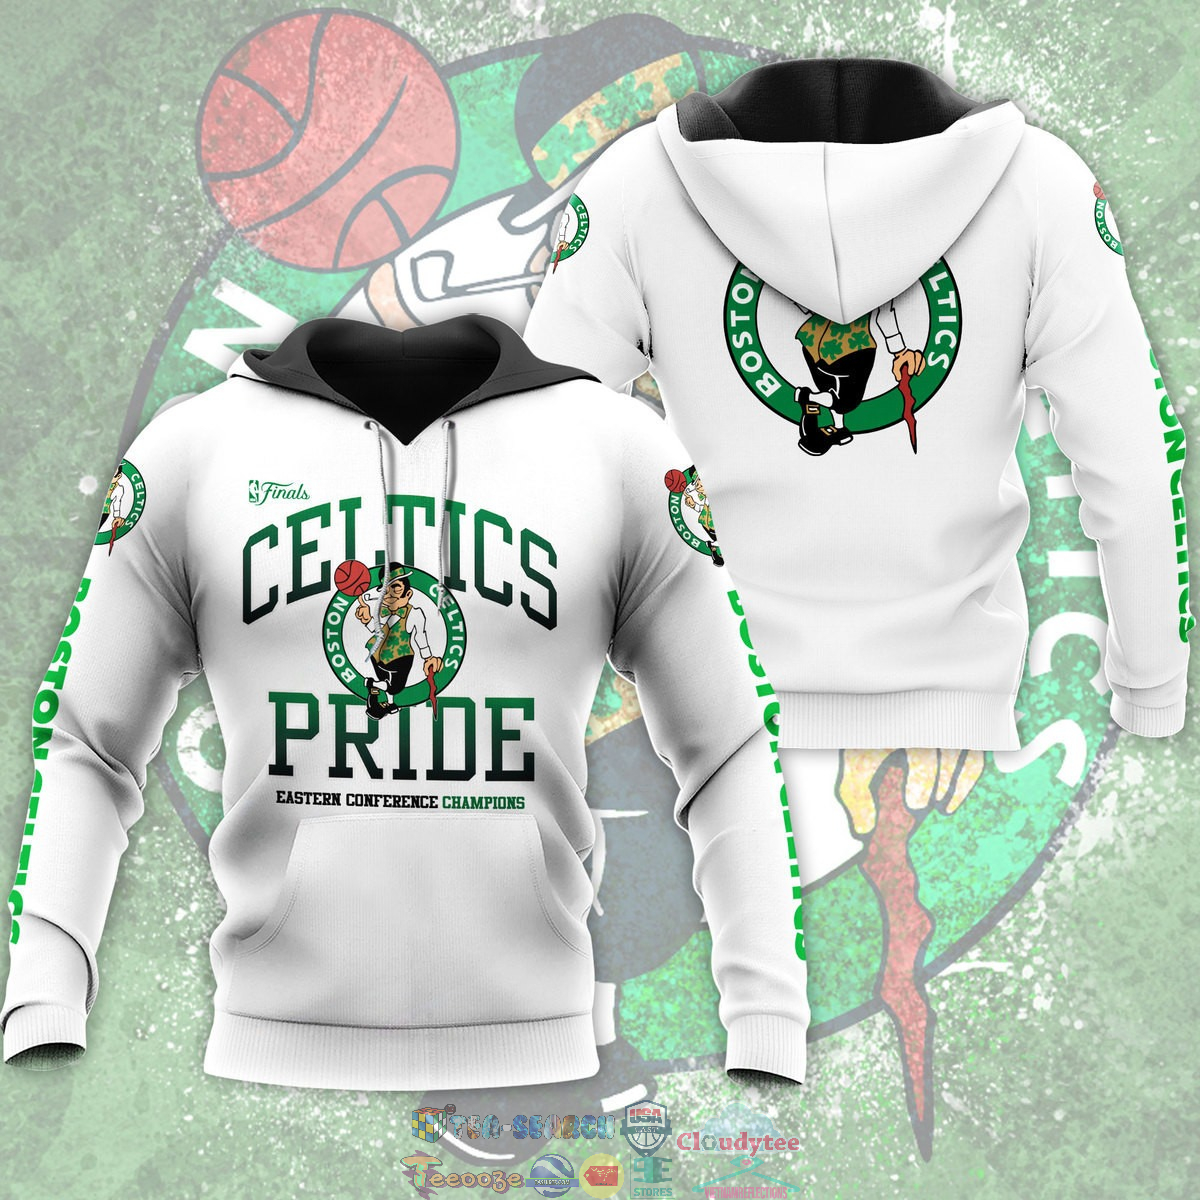 Celtics Pride 21-22 Eastern Conferrence Champions White 3D hoodie and t-shirt – Saleoff